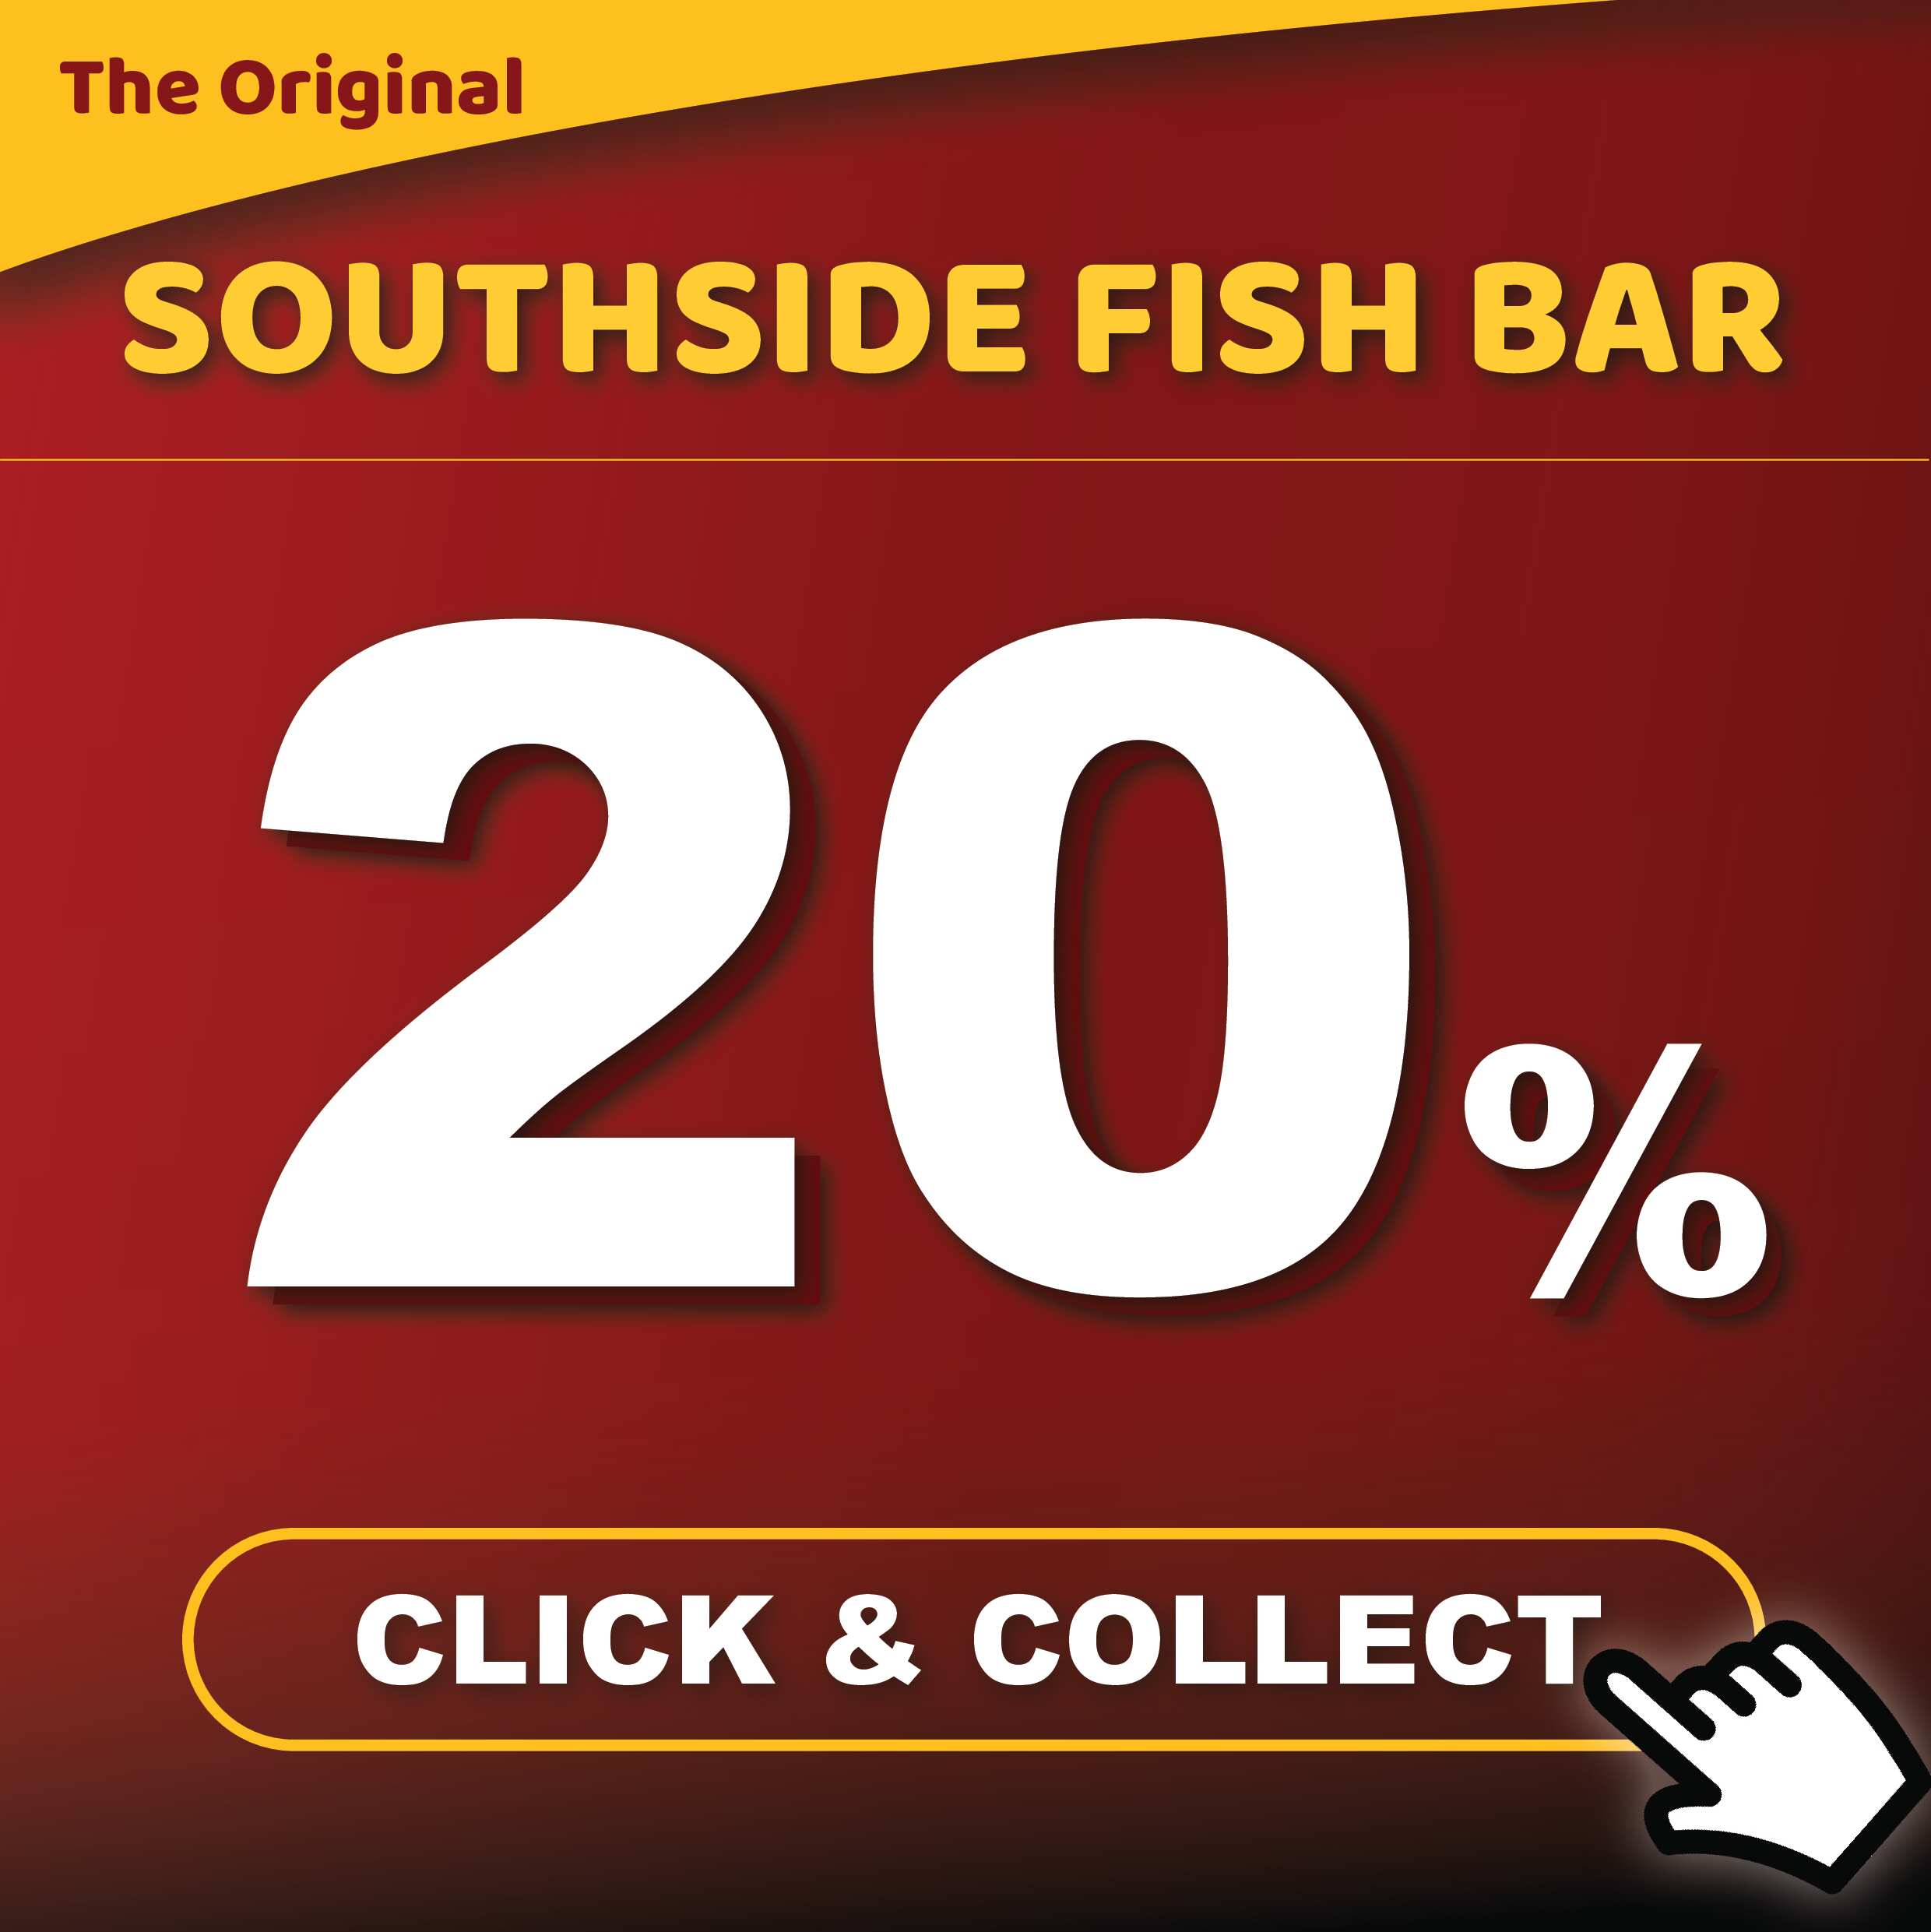 Southside Fish Bar 20% Discount Code Promotional Banner